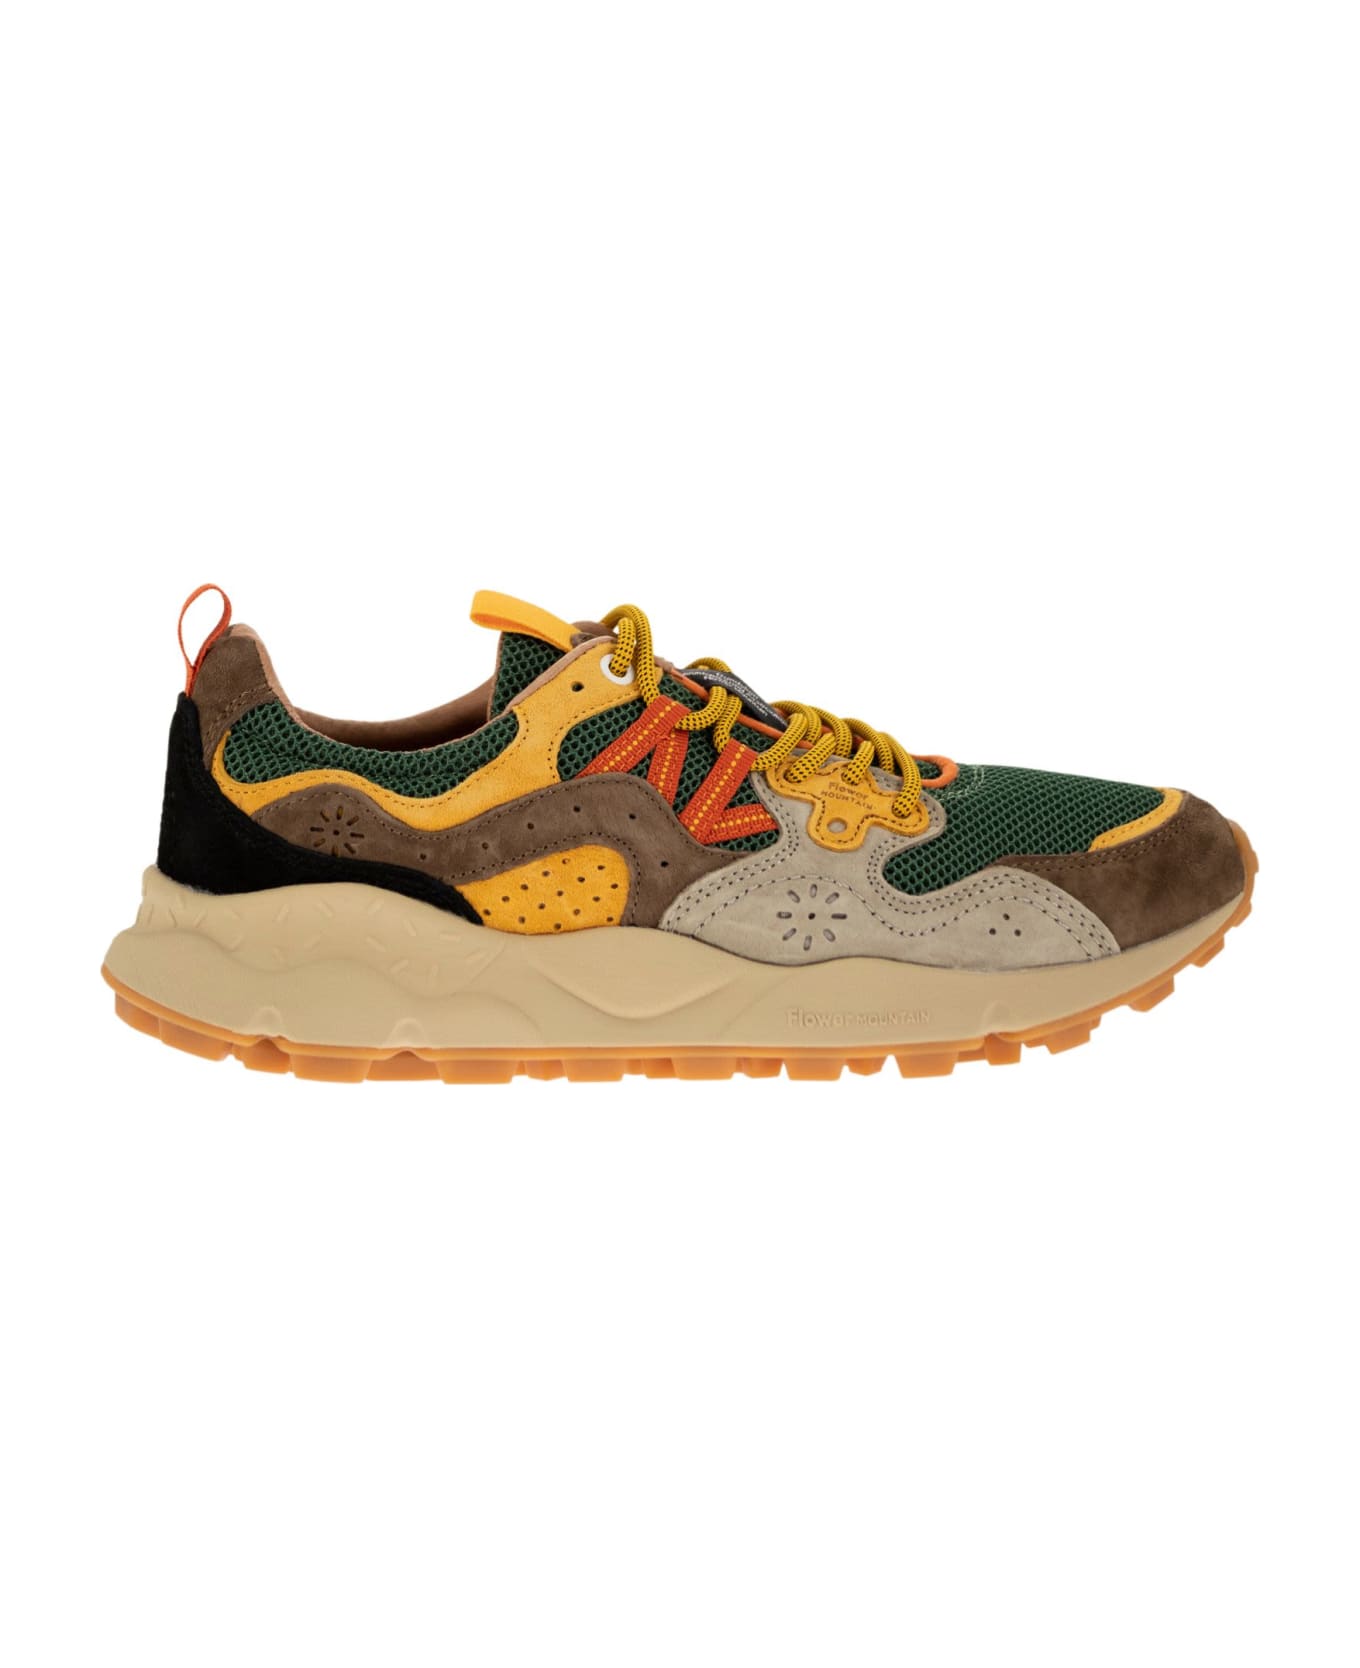 Flower Mountain Yamano 3 - Sneakers In Suede And Technical Fabric - Green スニーカー